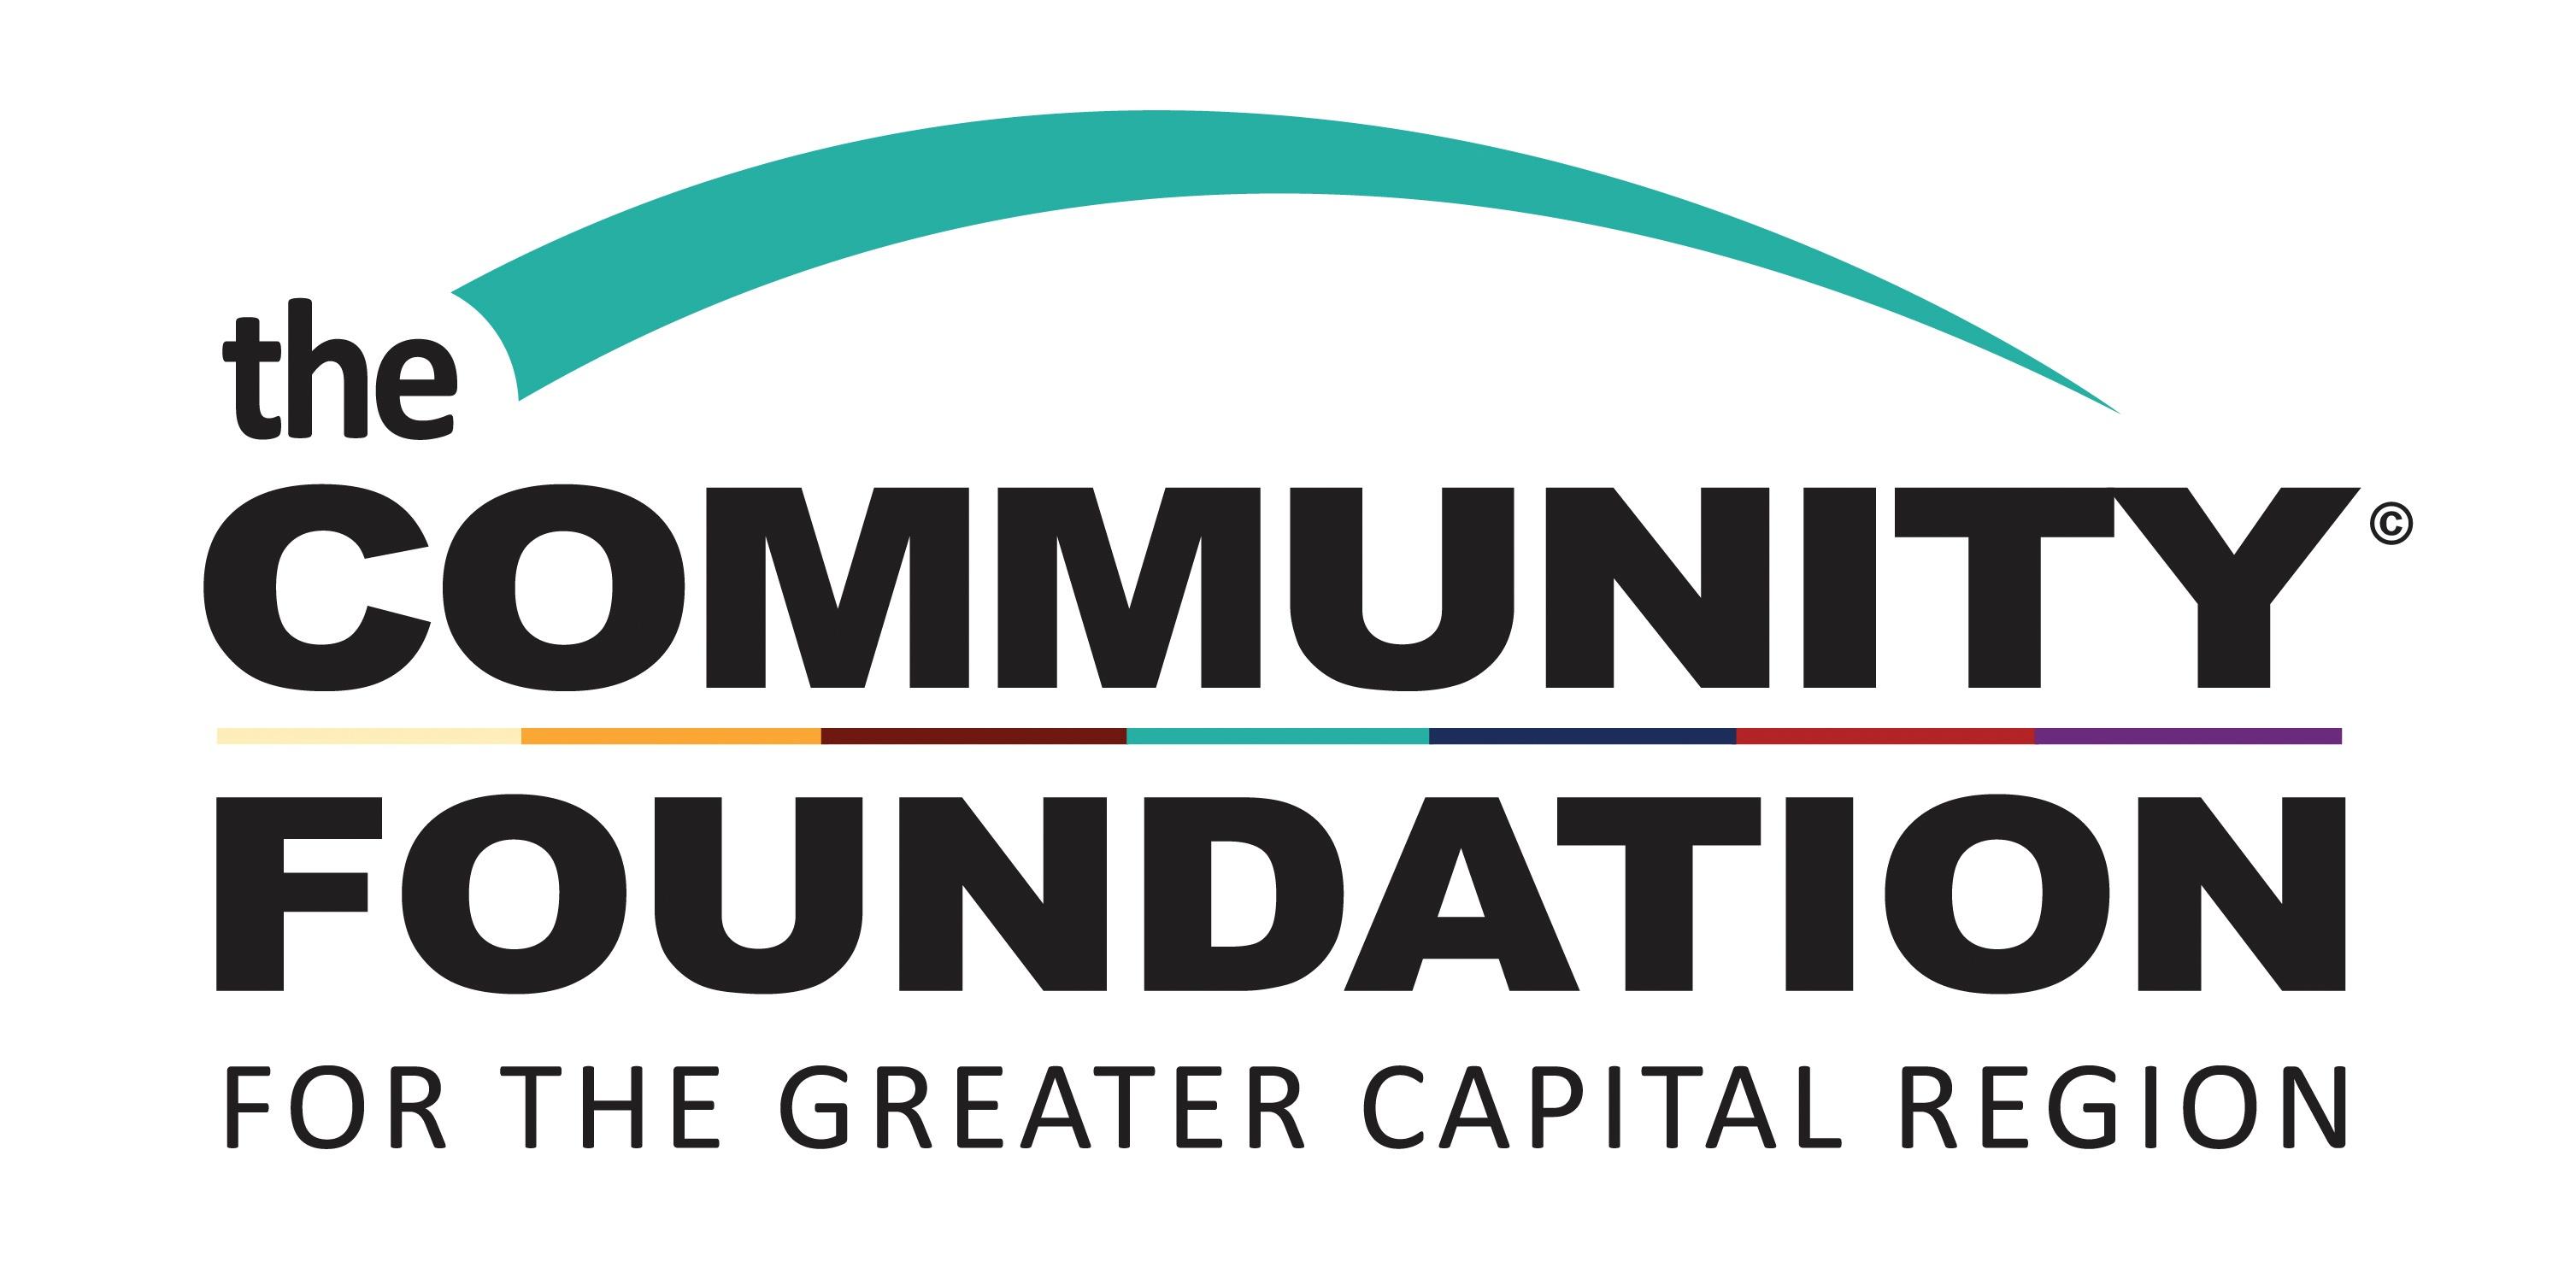 The Community Foundation for the Greater Capital Region Logo in black with a green arch over the top